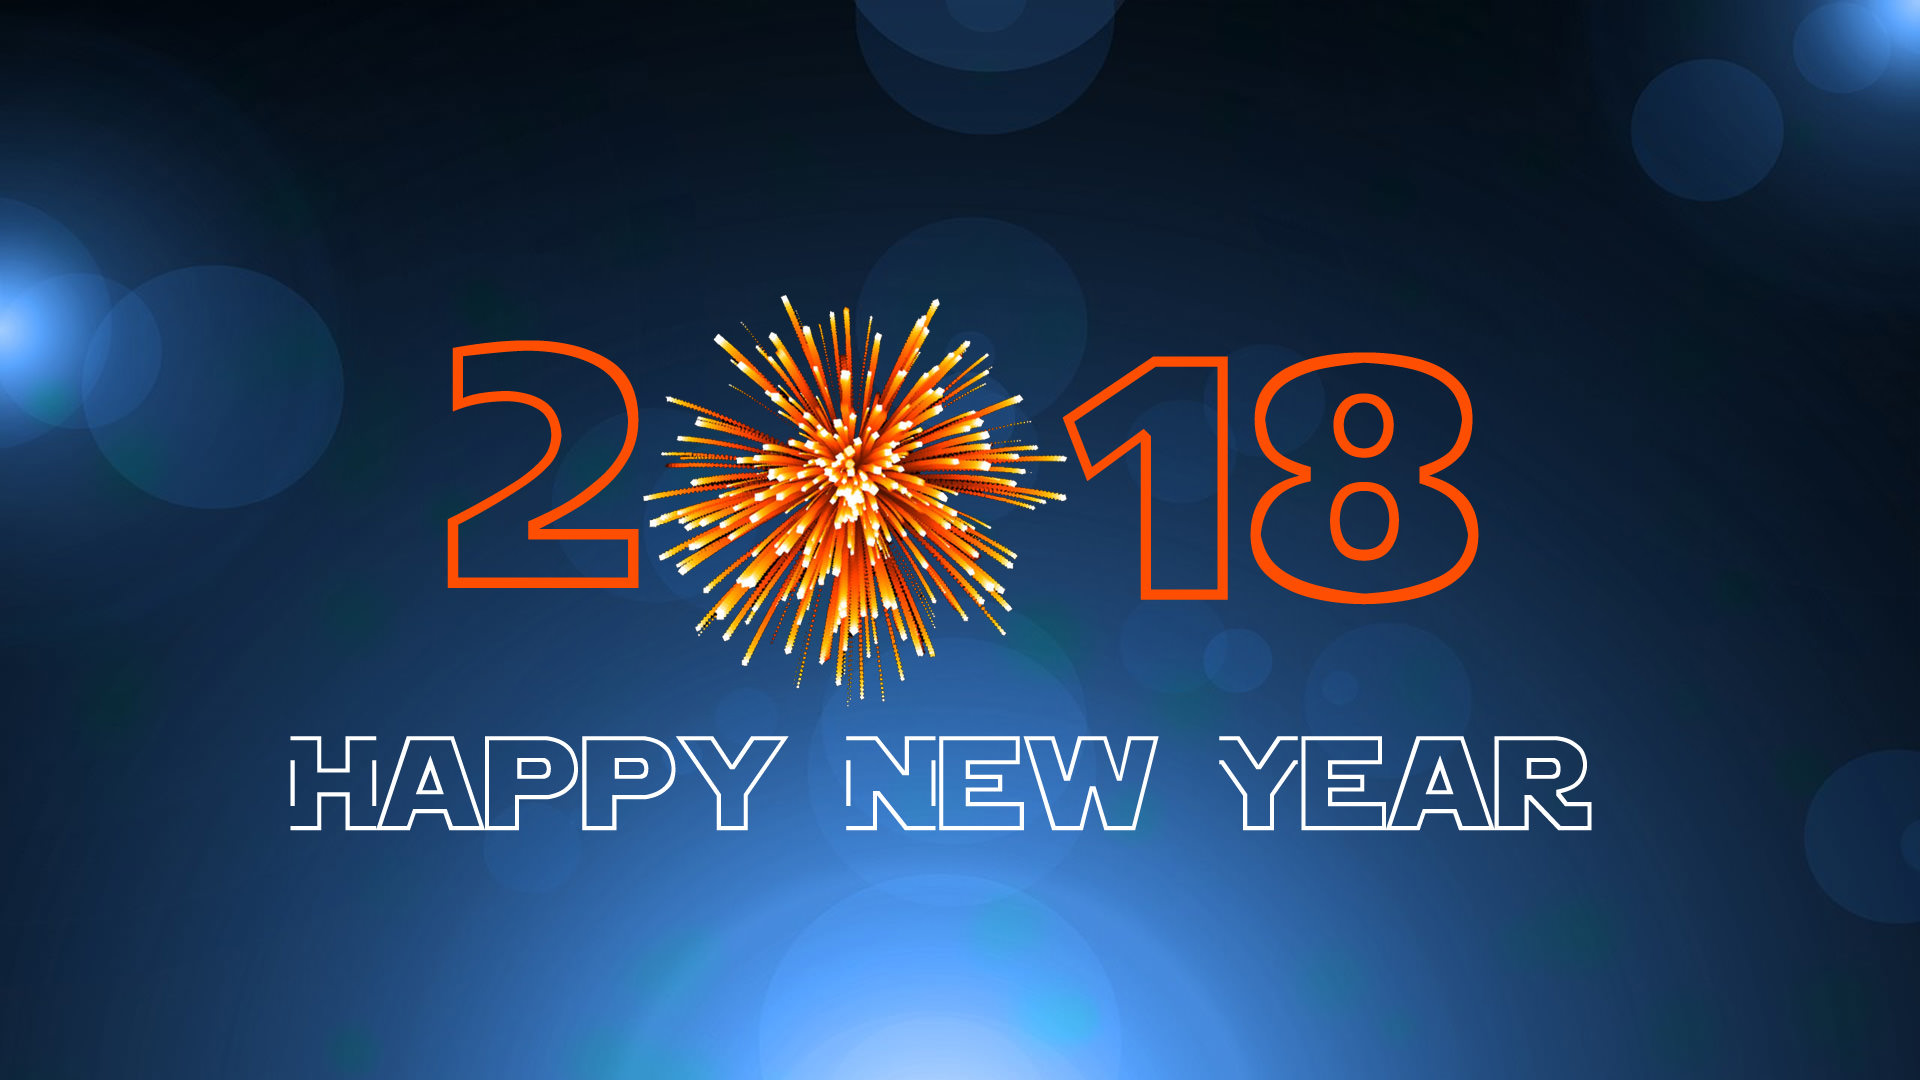 2018 Happy New Year Images for Desktop